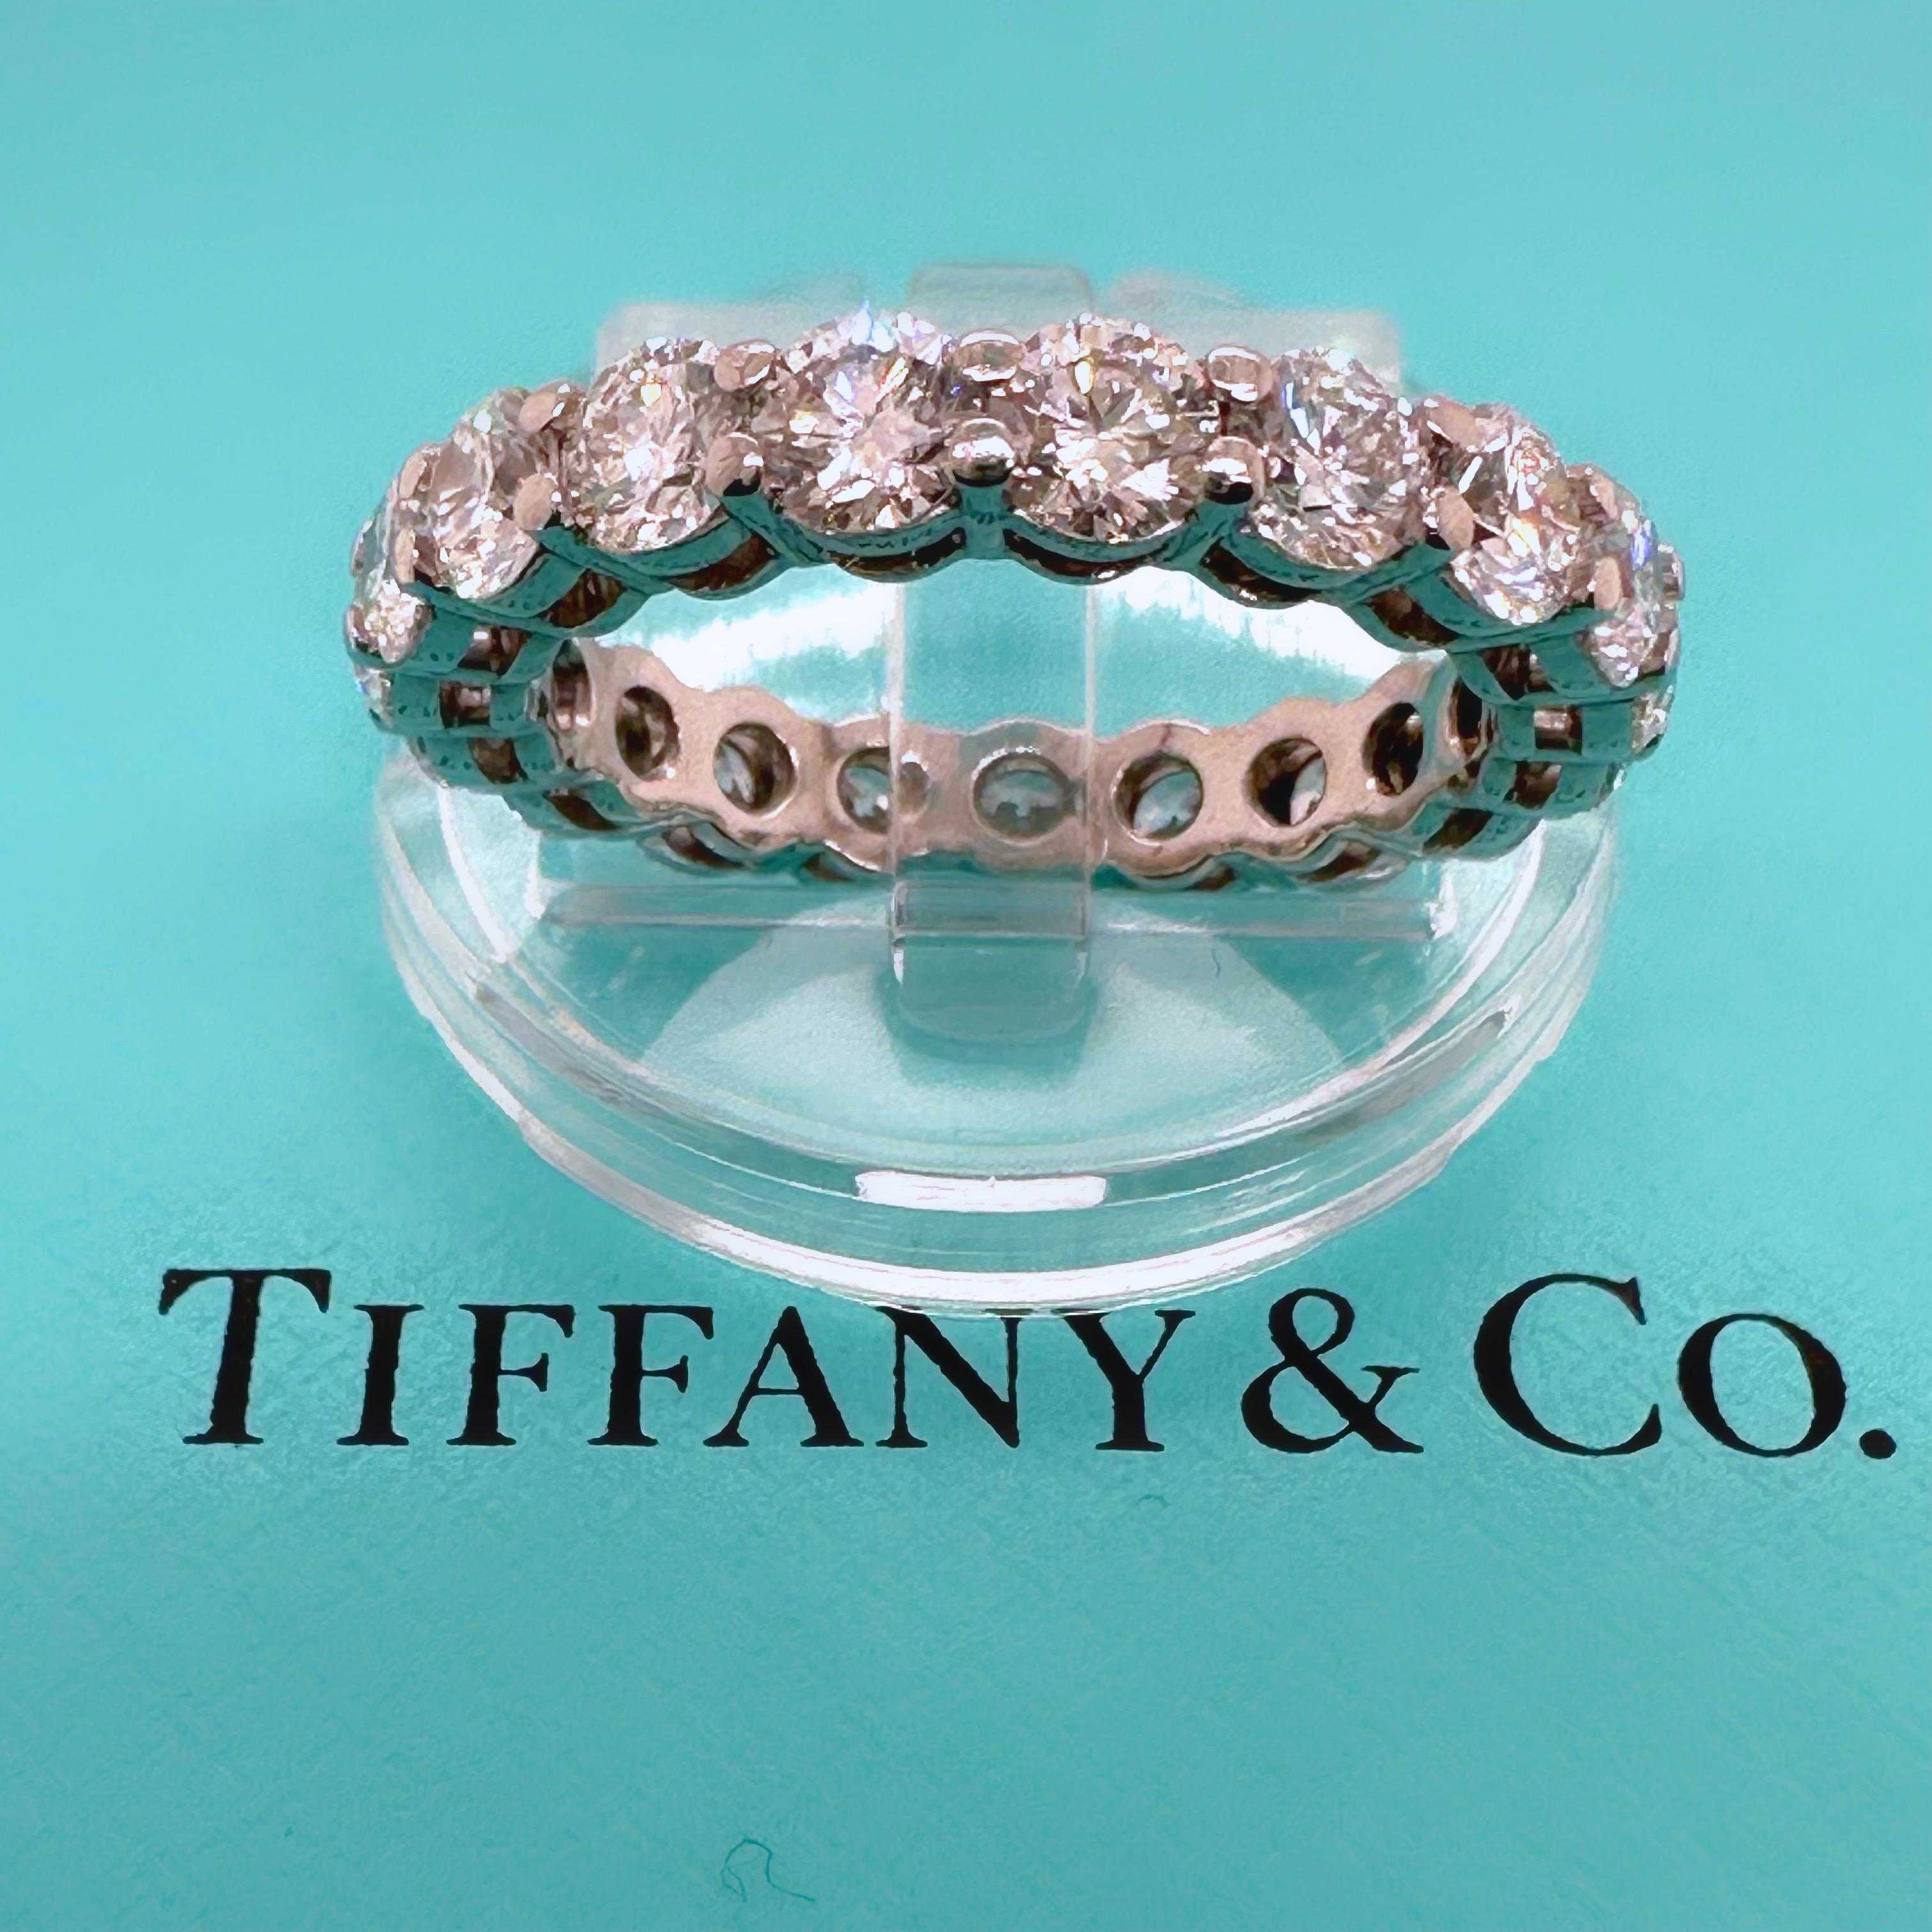 Tiffany & Co FOREVER Full Circle Round Diamond 3.02 tcw Band Ring Platinum For Sale 1